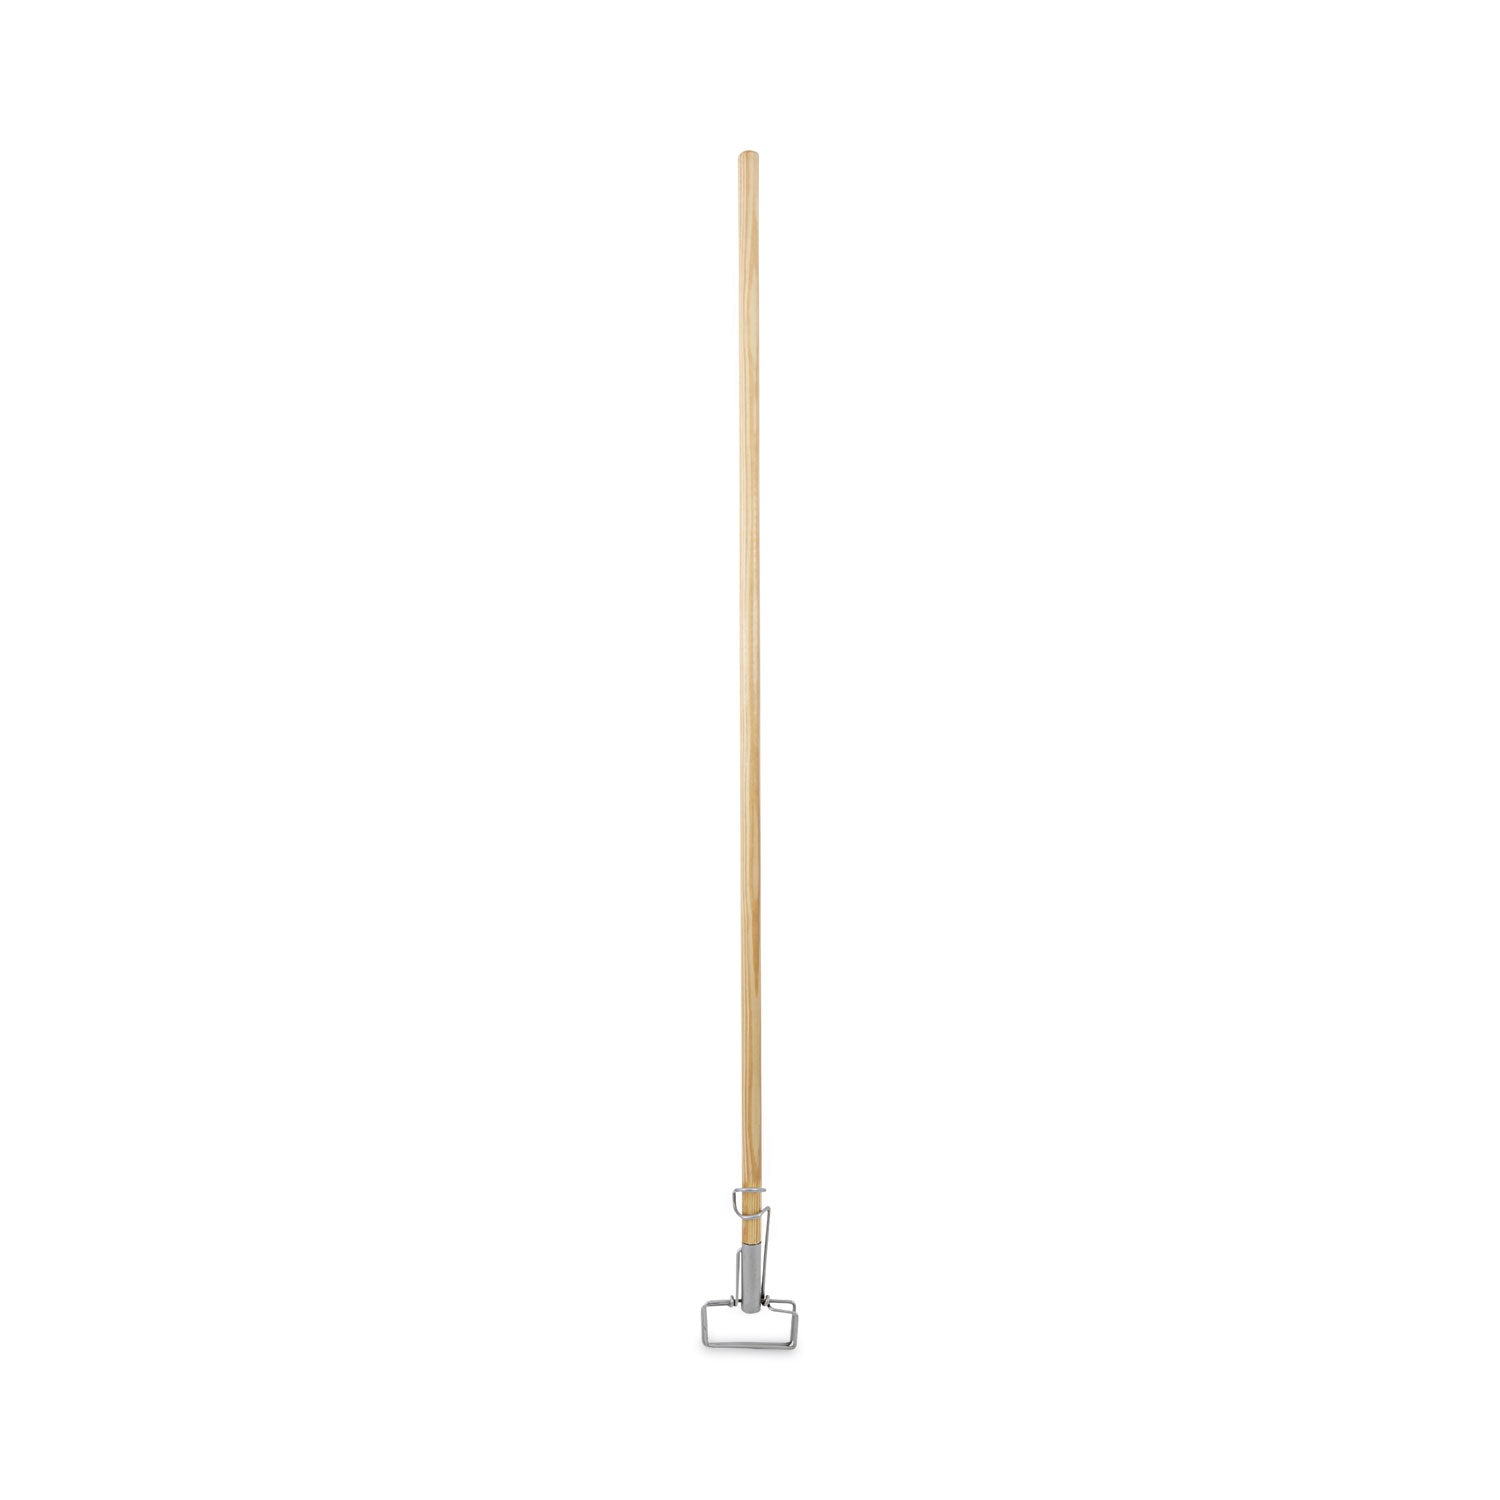 Spring Grip Metal Head Mop Handle for Most Mop Heads, Wood, 60", Natural - 